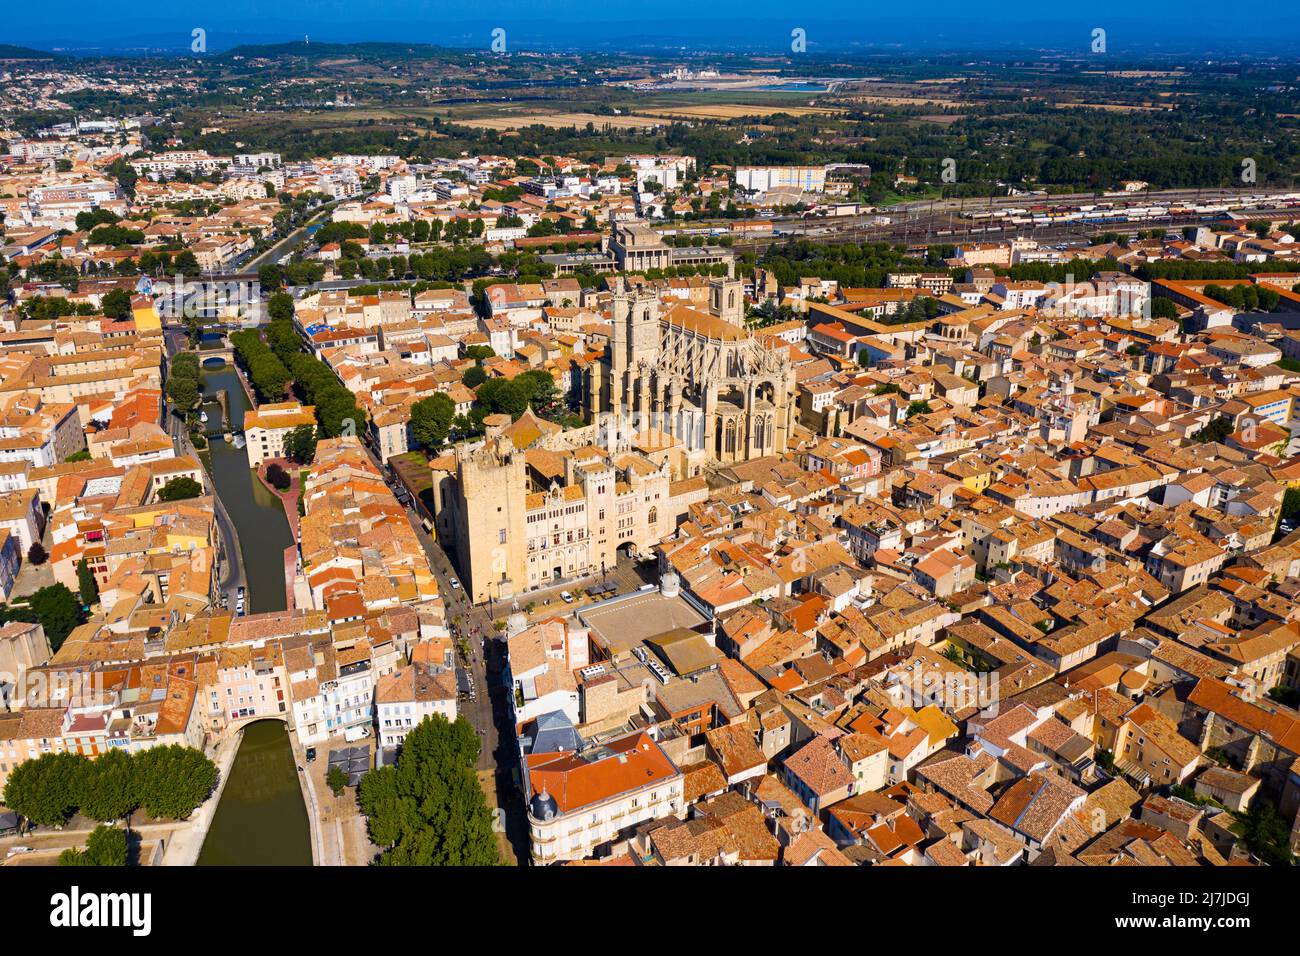 Aerial view of Narbonne, France Stock Photo